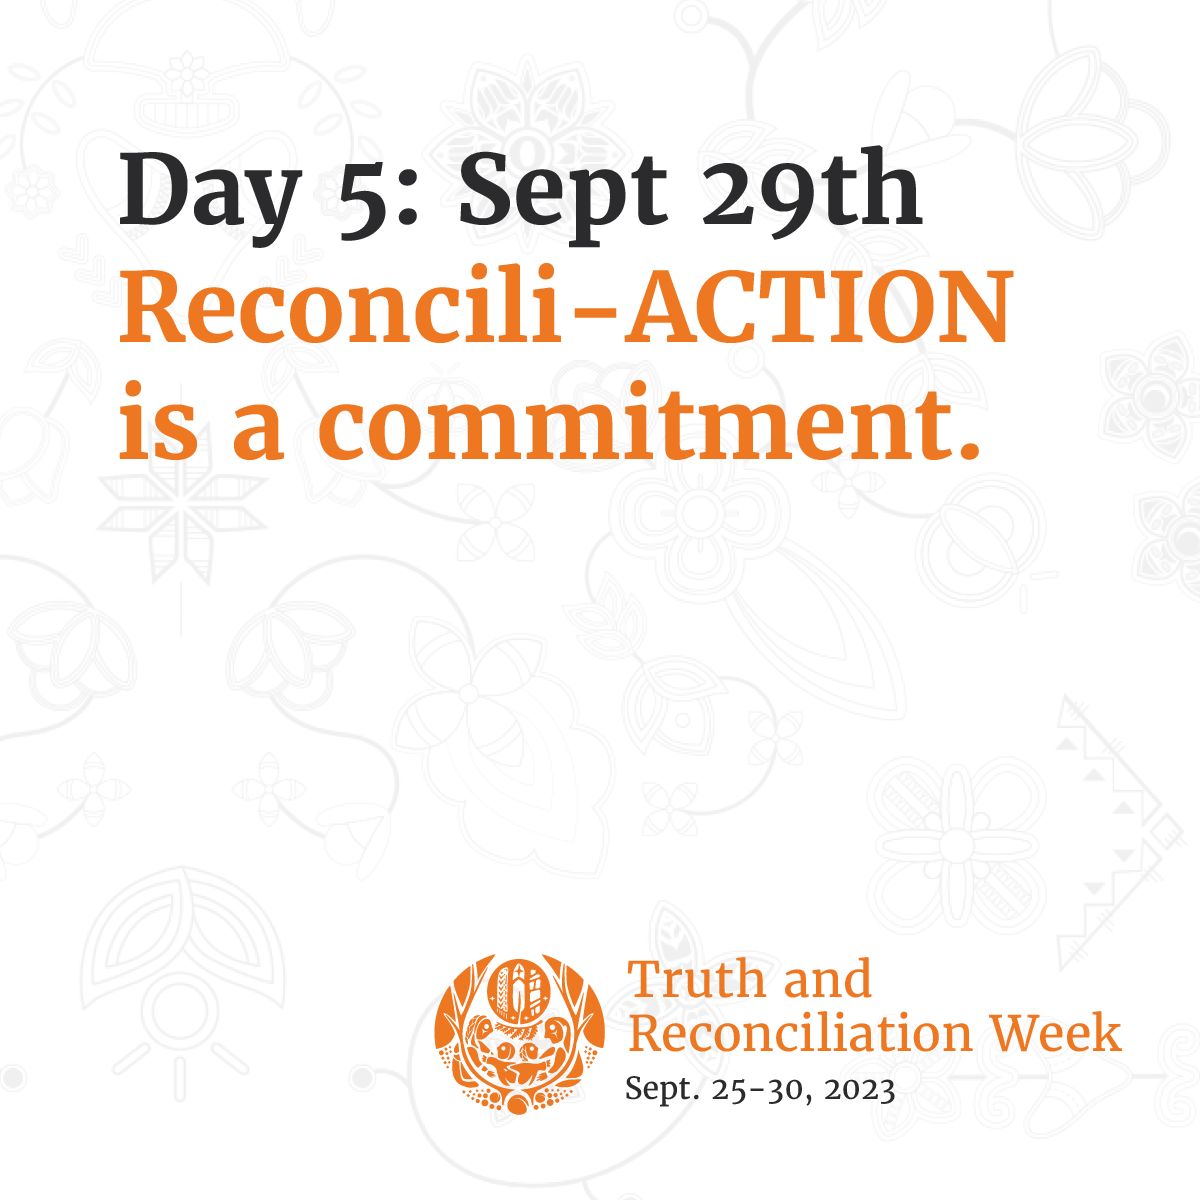 Today, we empower students to take action for Reconciliation within themselves, schools, families, and communities. Share what #Reconciliation means to you and one action you can take. Tag friends and share to start the journey. #truthandreconciliation #NCTR #orangeshirtday @RBC